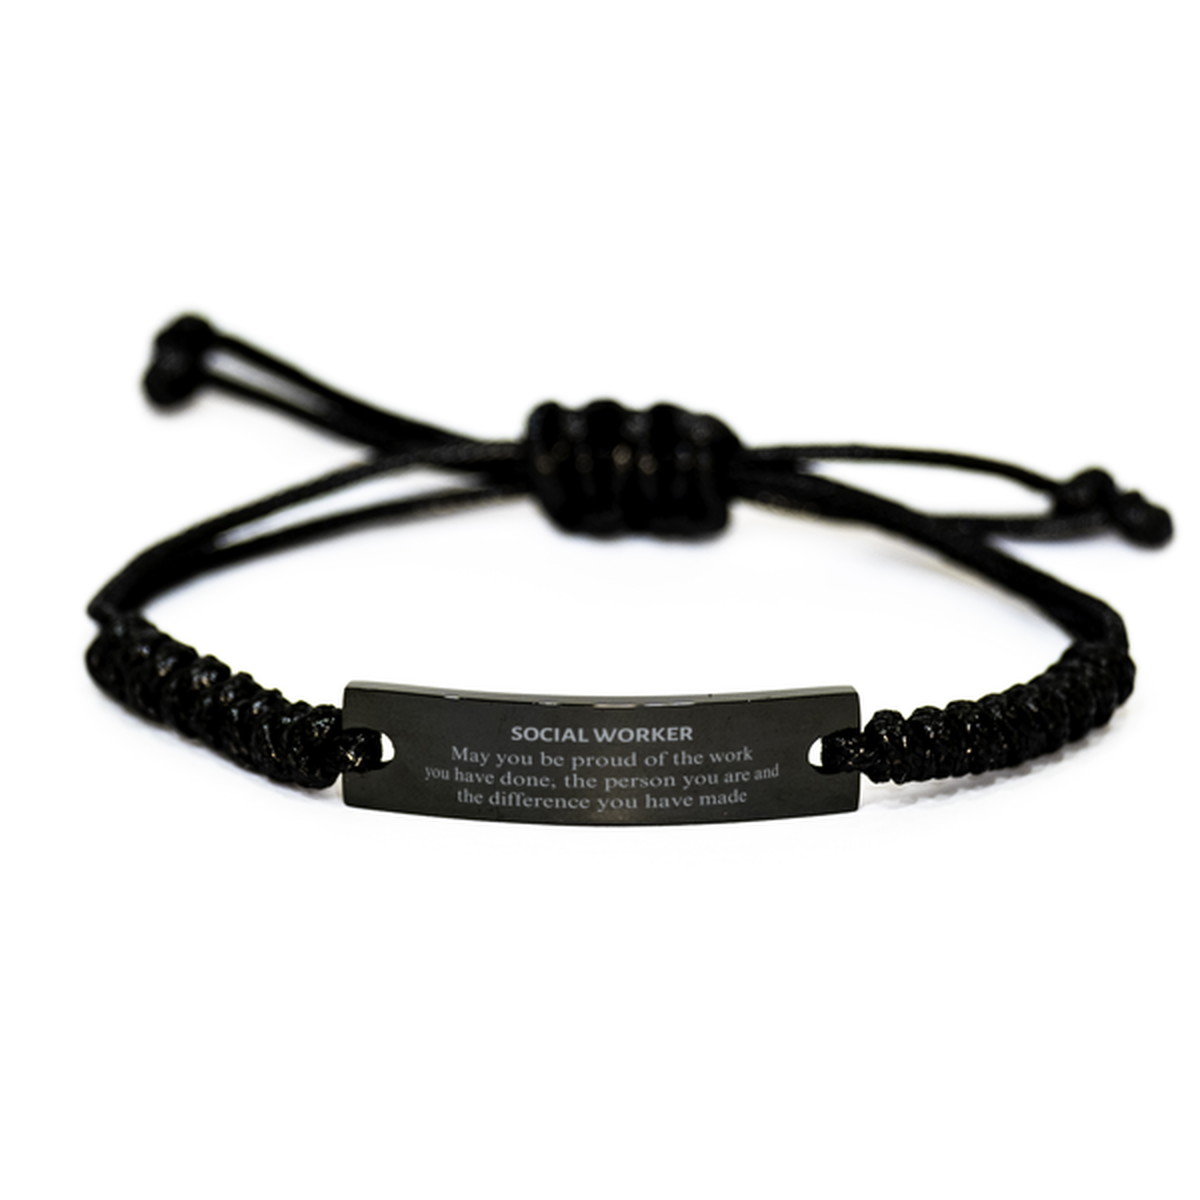 Social Worker May you be proud of the work you have done, Retirement Social Worker Black Rope Bracelet for Colleague Appreciation Gifts Amazing for Social Worker